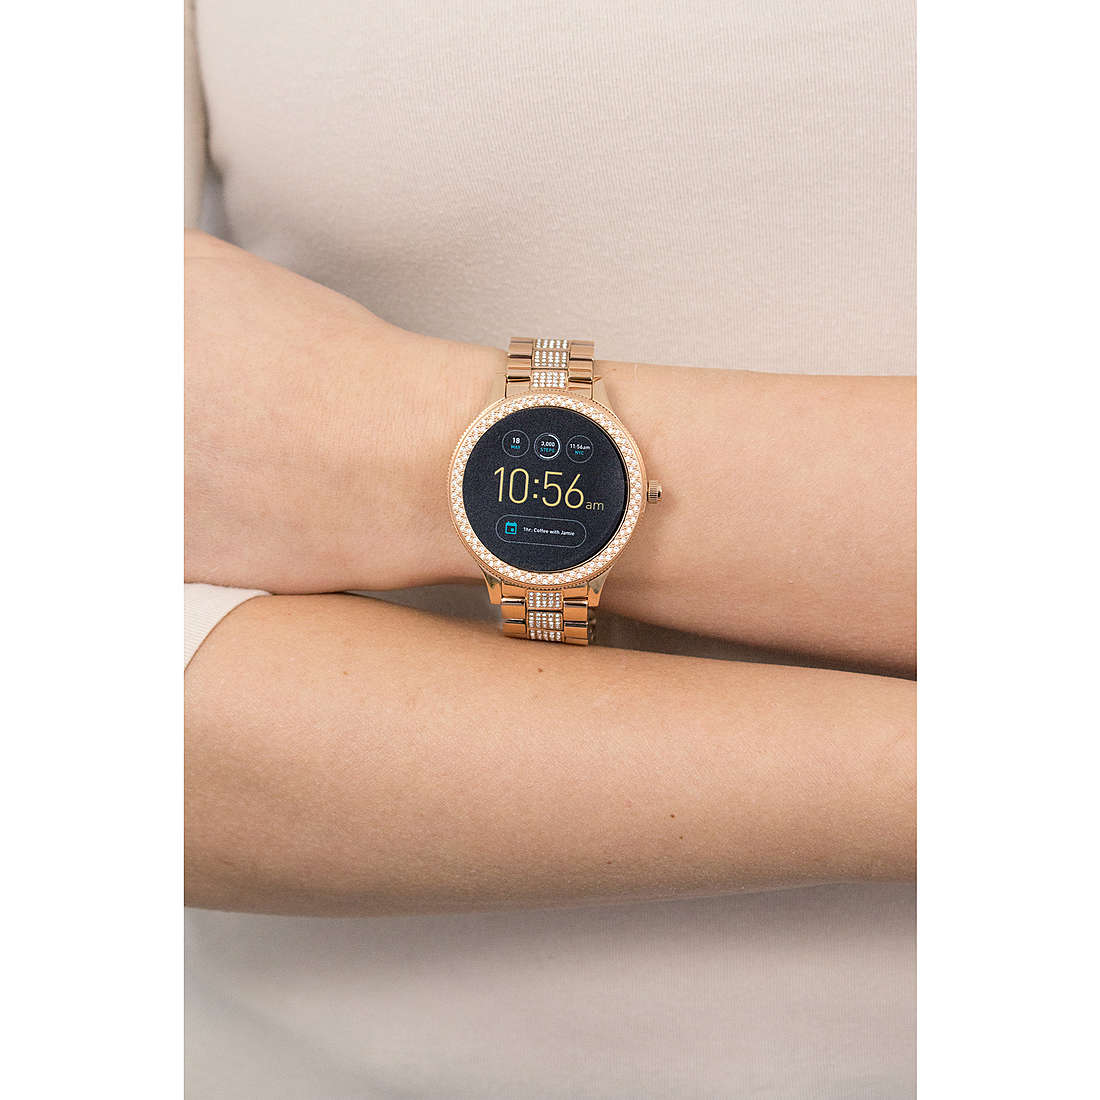 Fossil Smartwatches Q Venture woman FTW6008 wearing